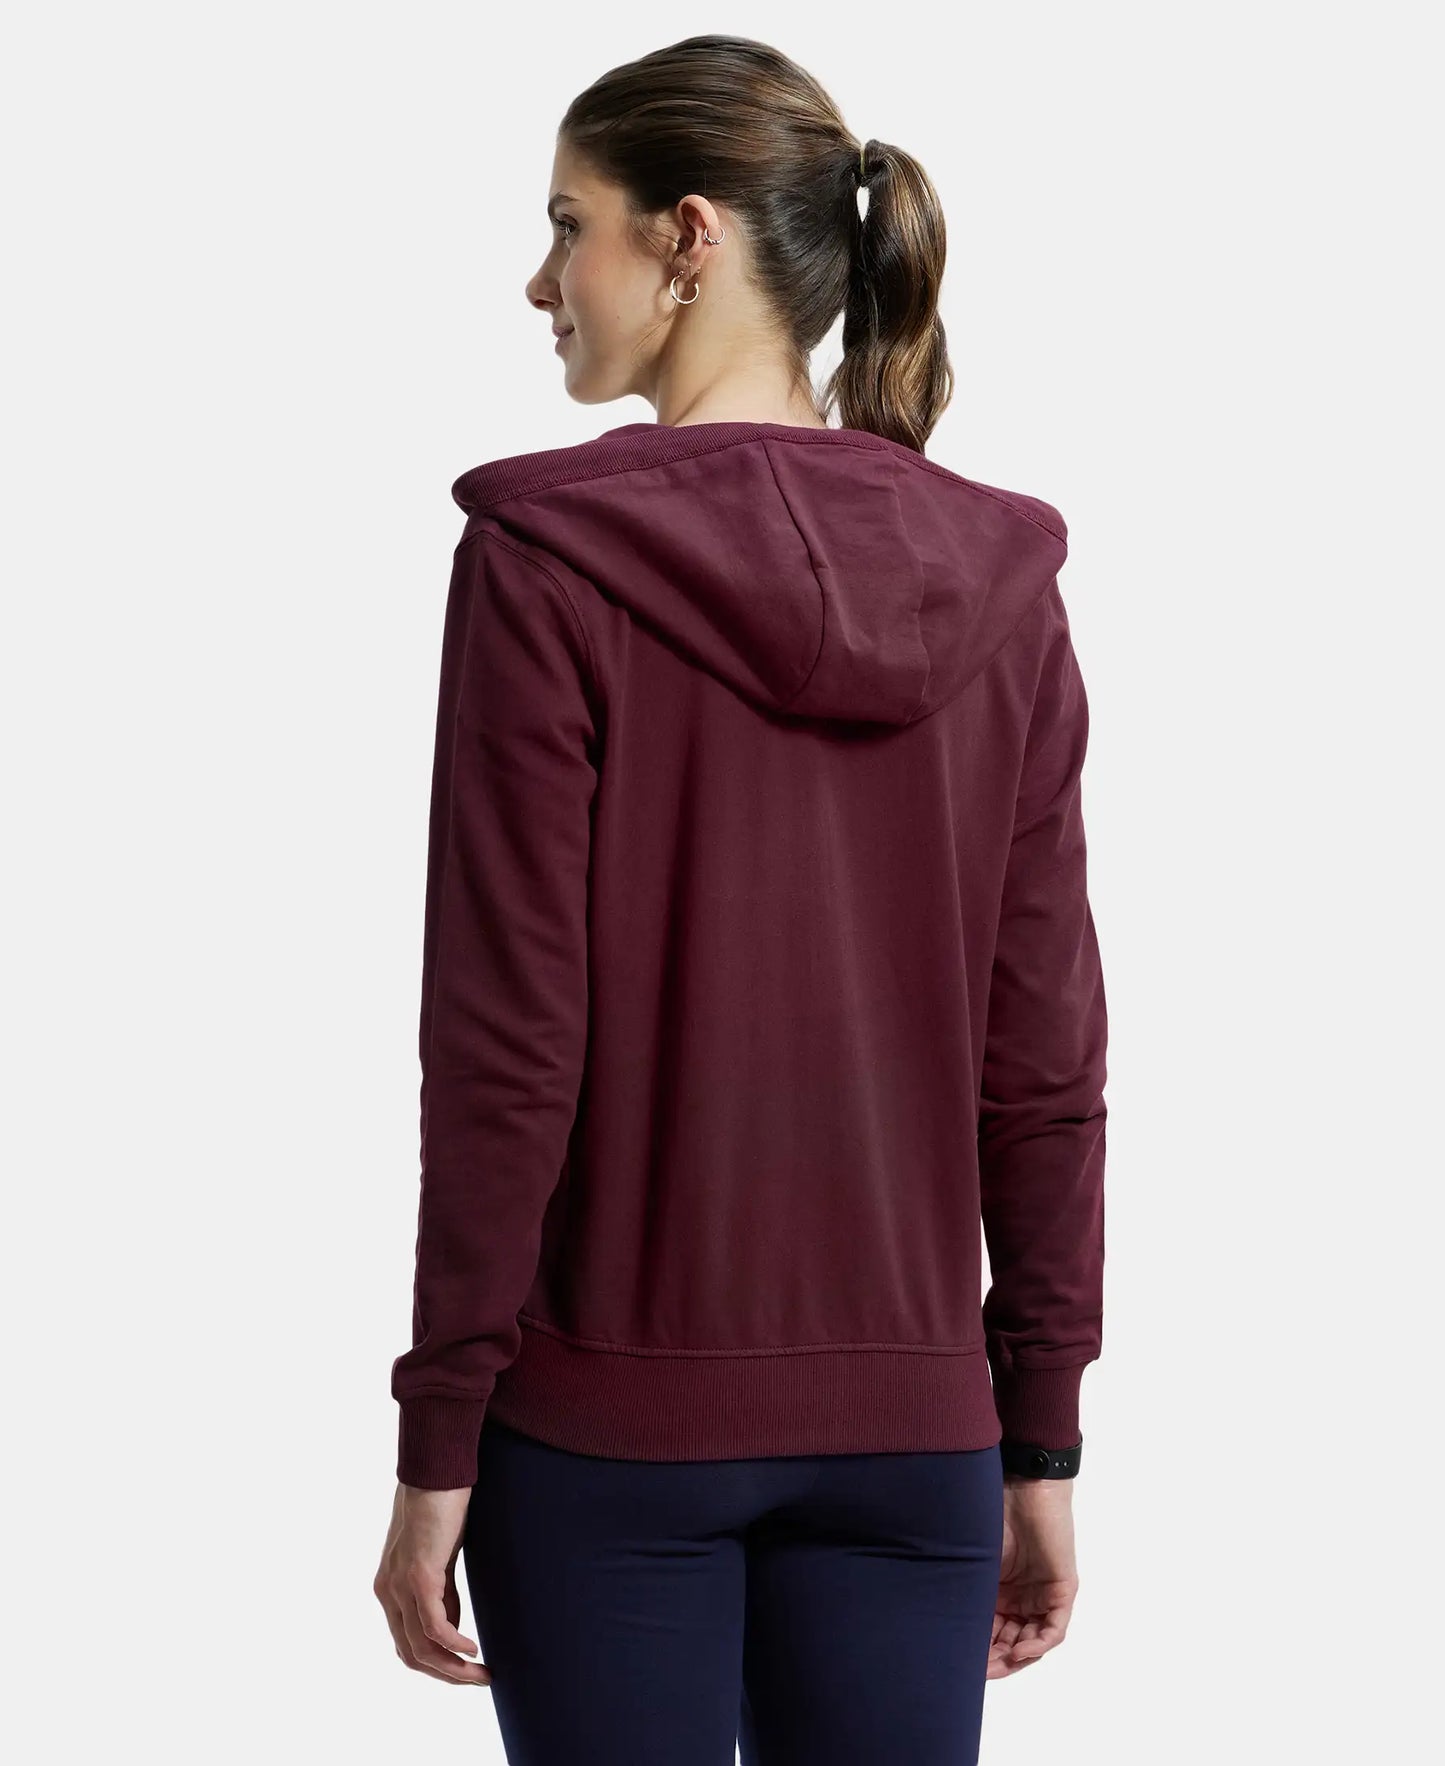 Super Combed Cotton French Terry Fabric Hoodie Jacket with Side Pockets - Wine Tasting-3